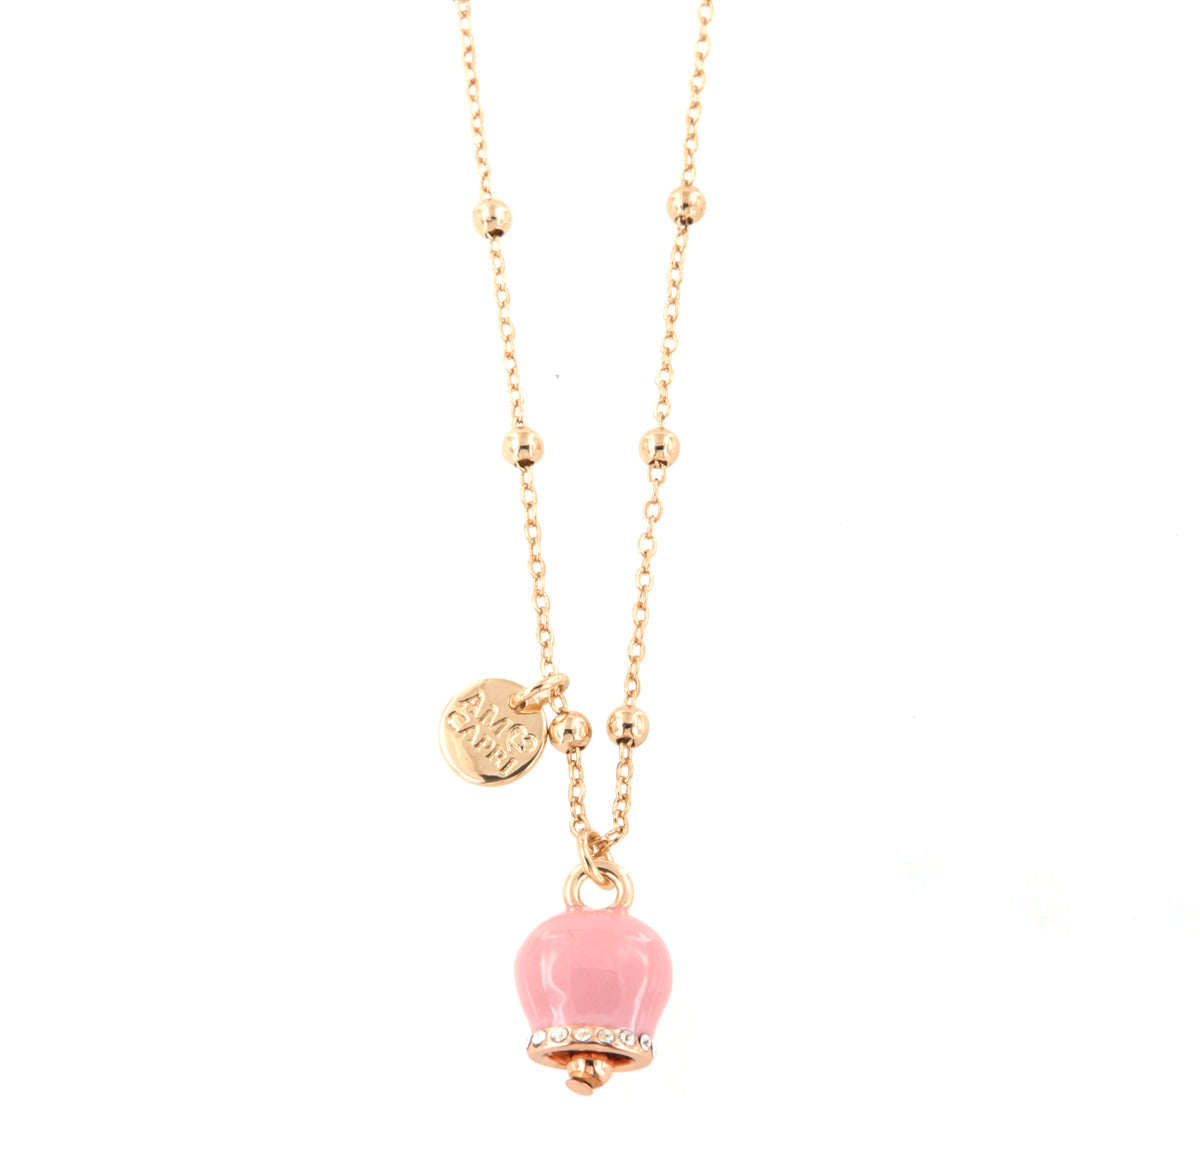 Metal necklace with pendant lucky charm, embellished with pink enamel and crystals